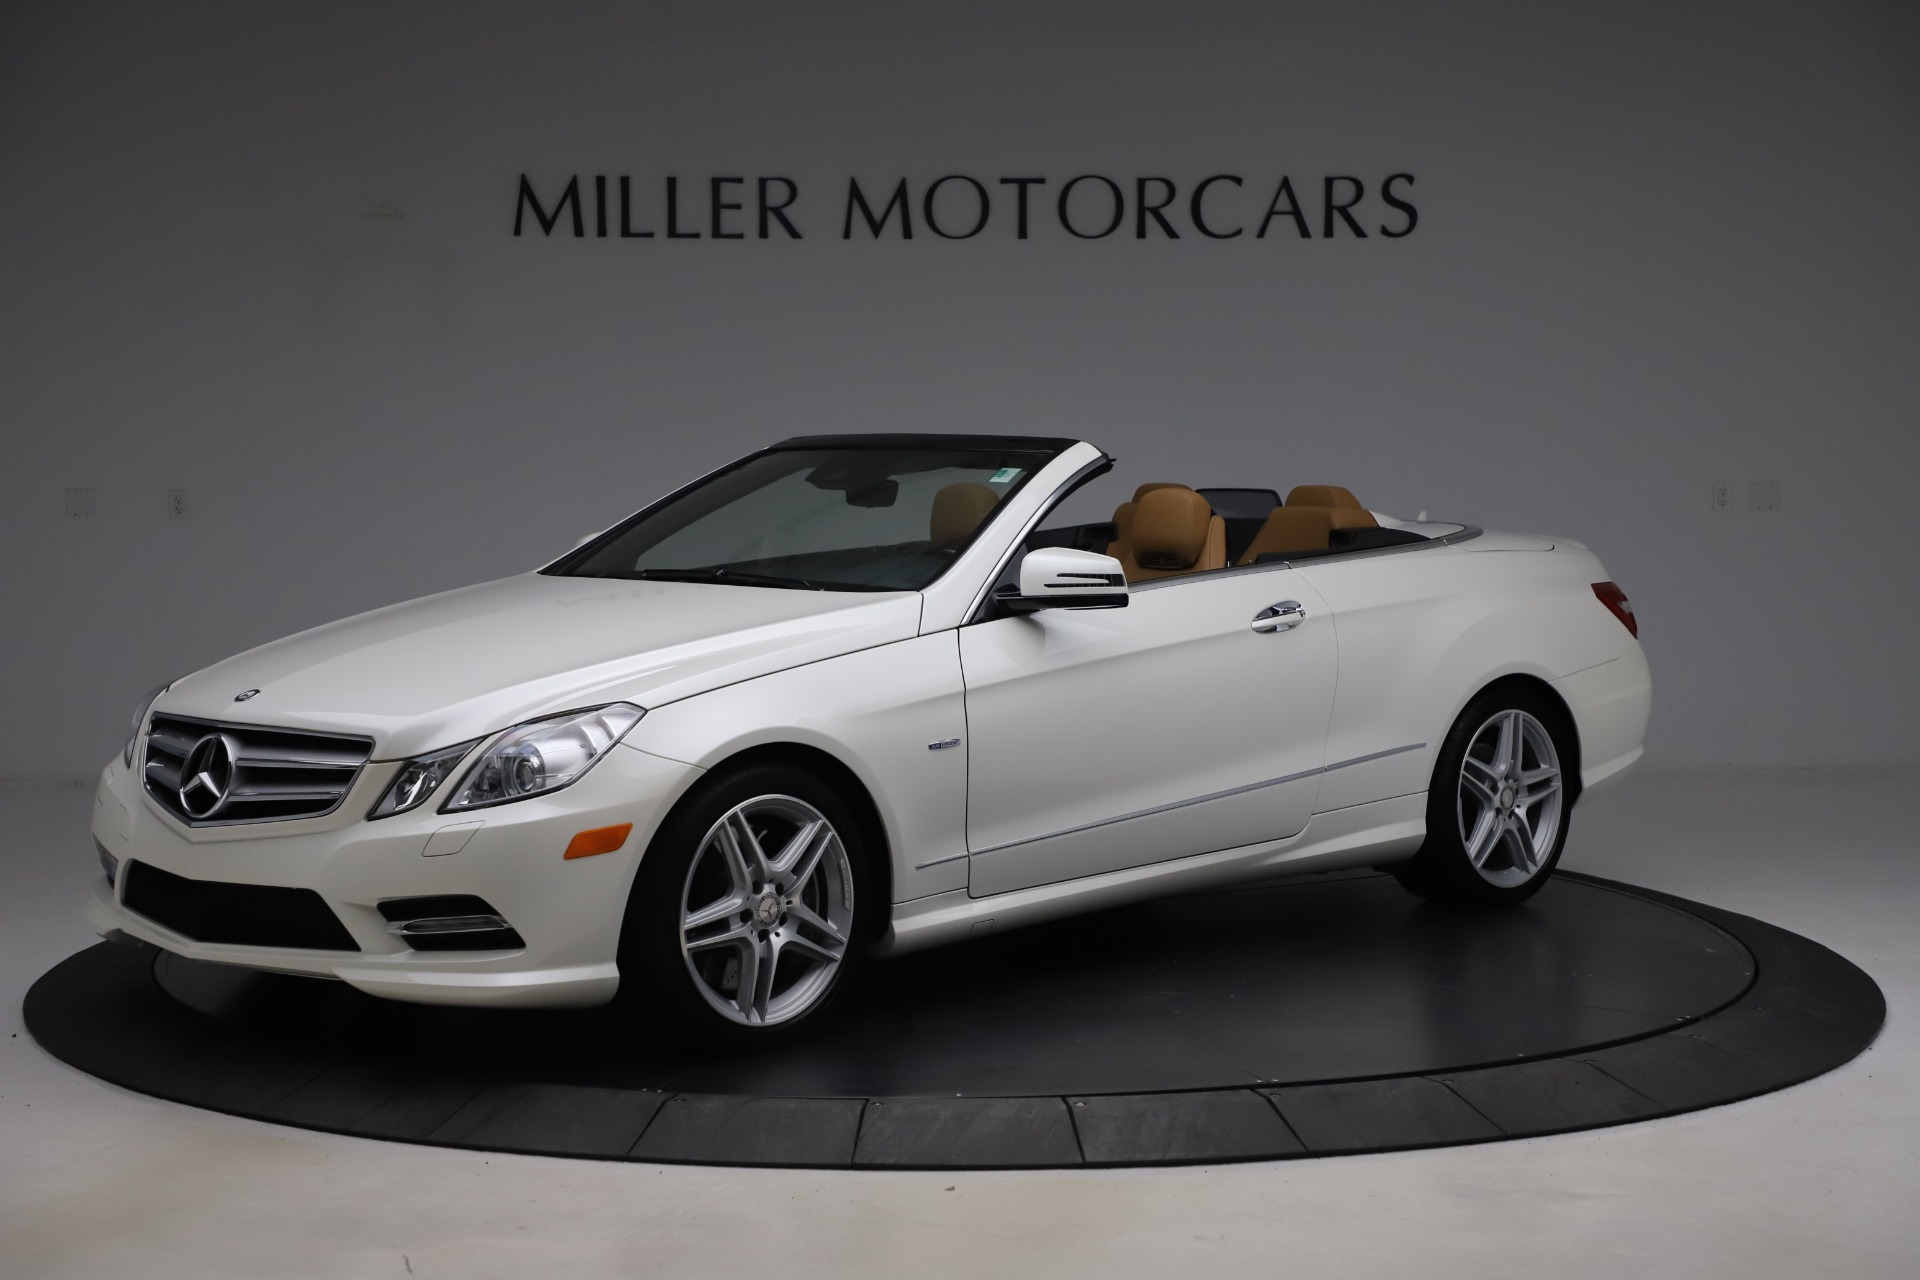 Used 2012 Mercedes-Benz E-Class E 550 for sale Sold at Bentley Greenwich in Greenwich CT 06830 1